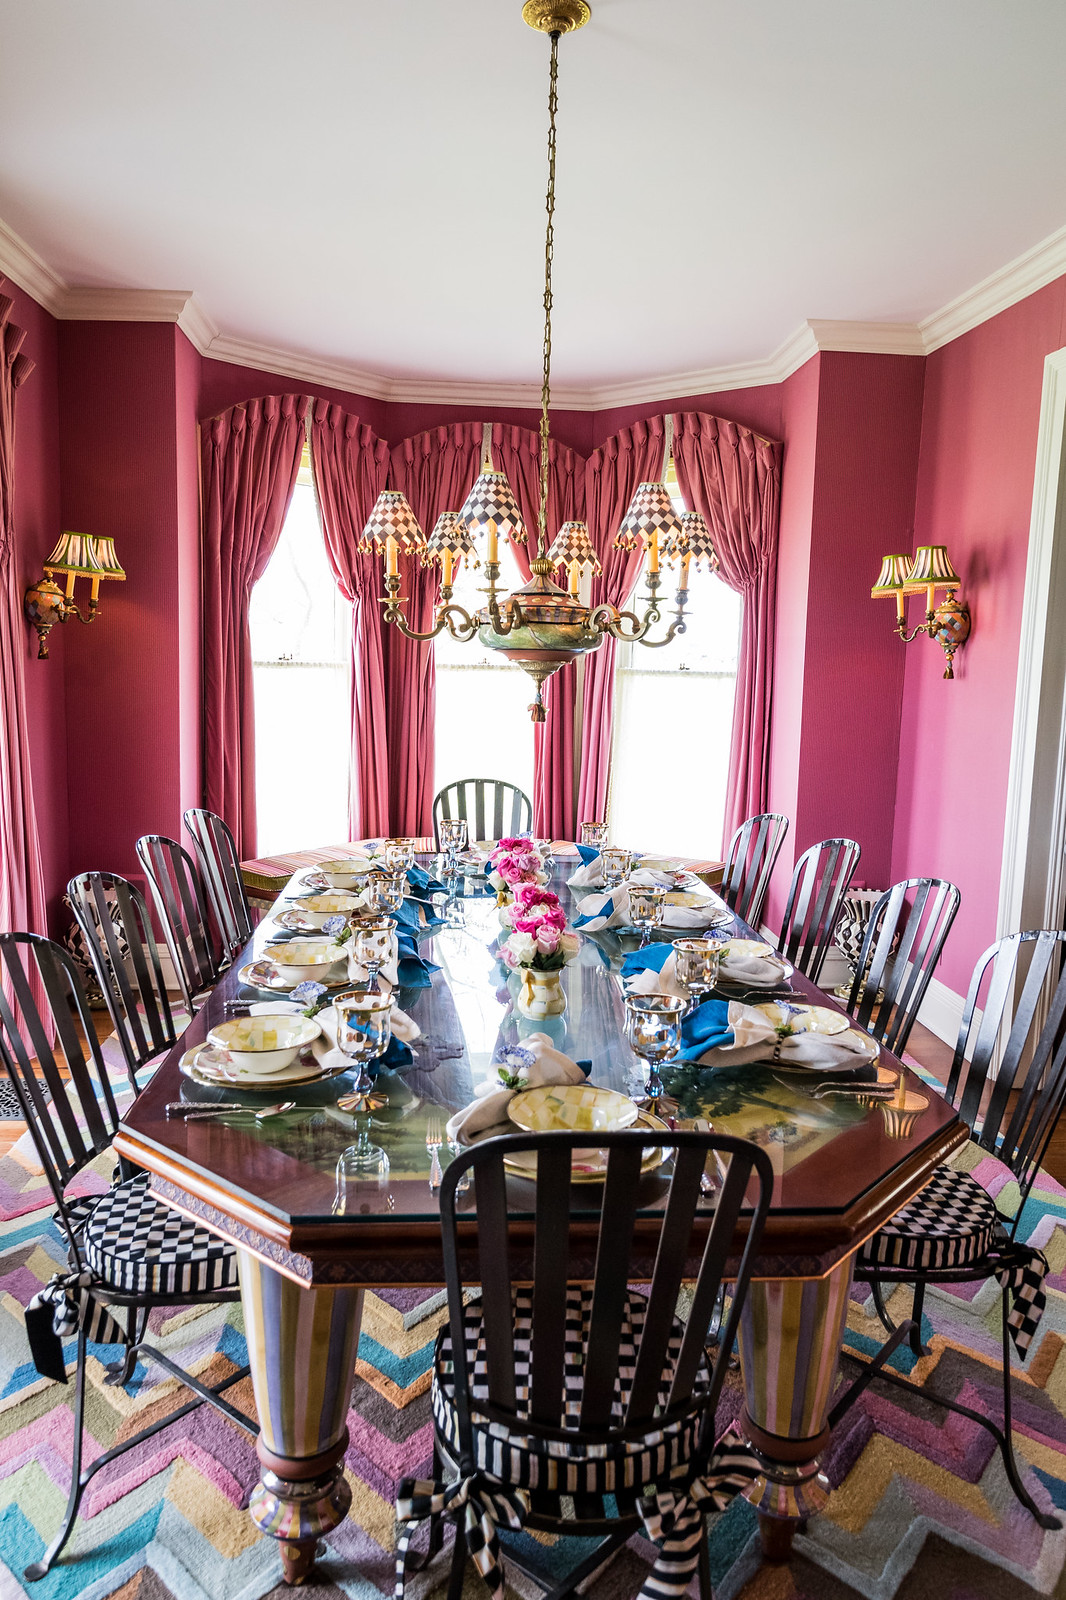 we enjoyed several meals in the Mackenzie-Childs farmhouse dining room